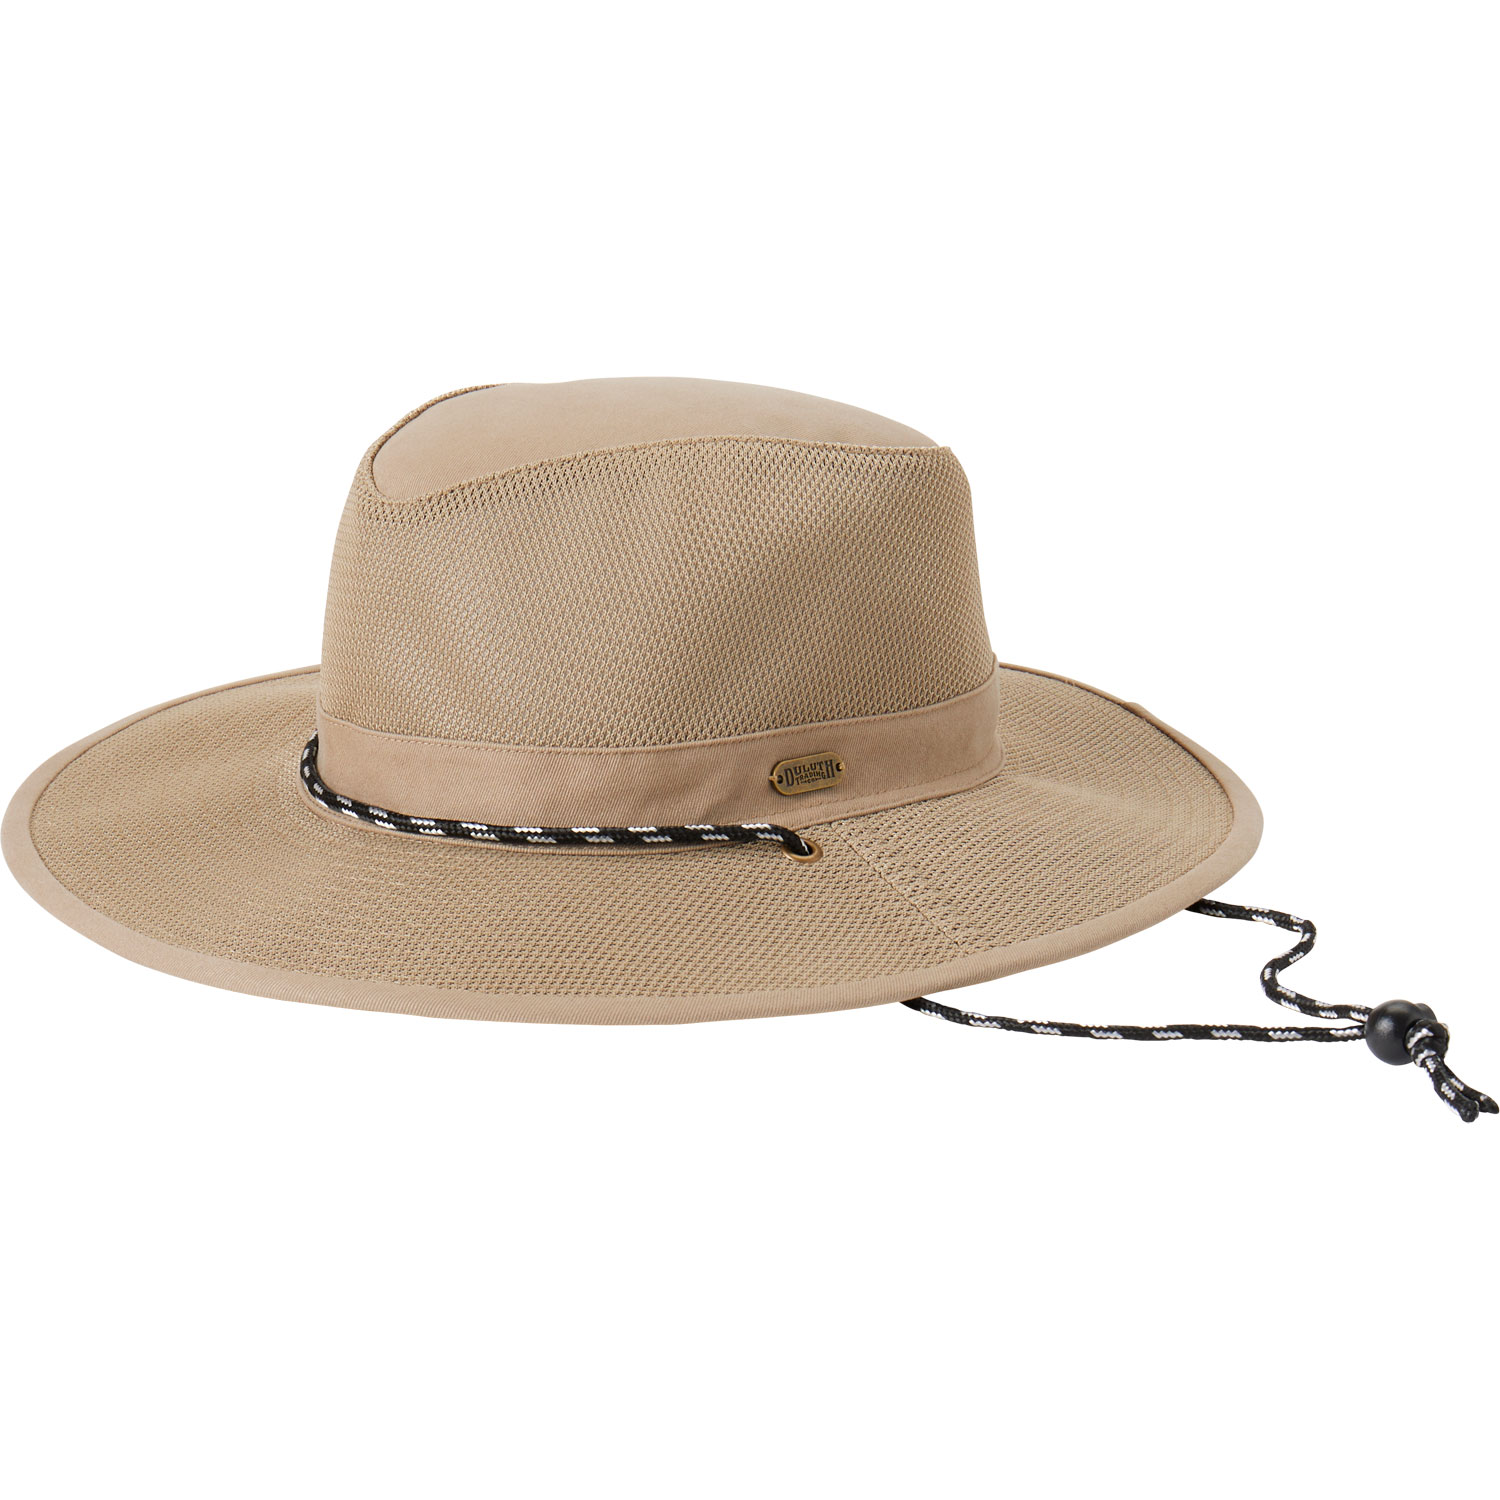 DULUTH TRADING BEIGE OUTBACK CRUSHER PACKABLE SUN HAT MEN'S LARGE